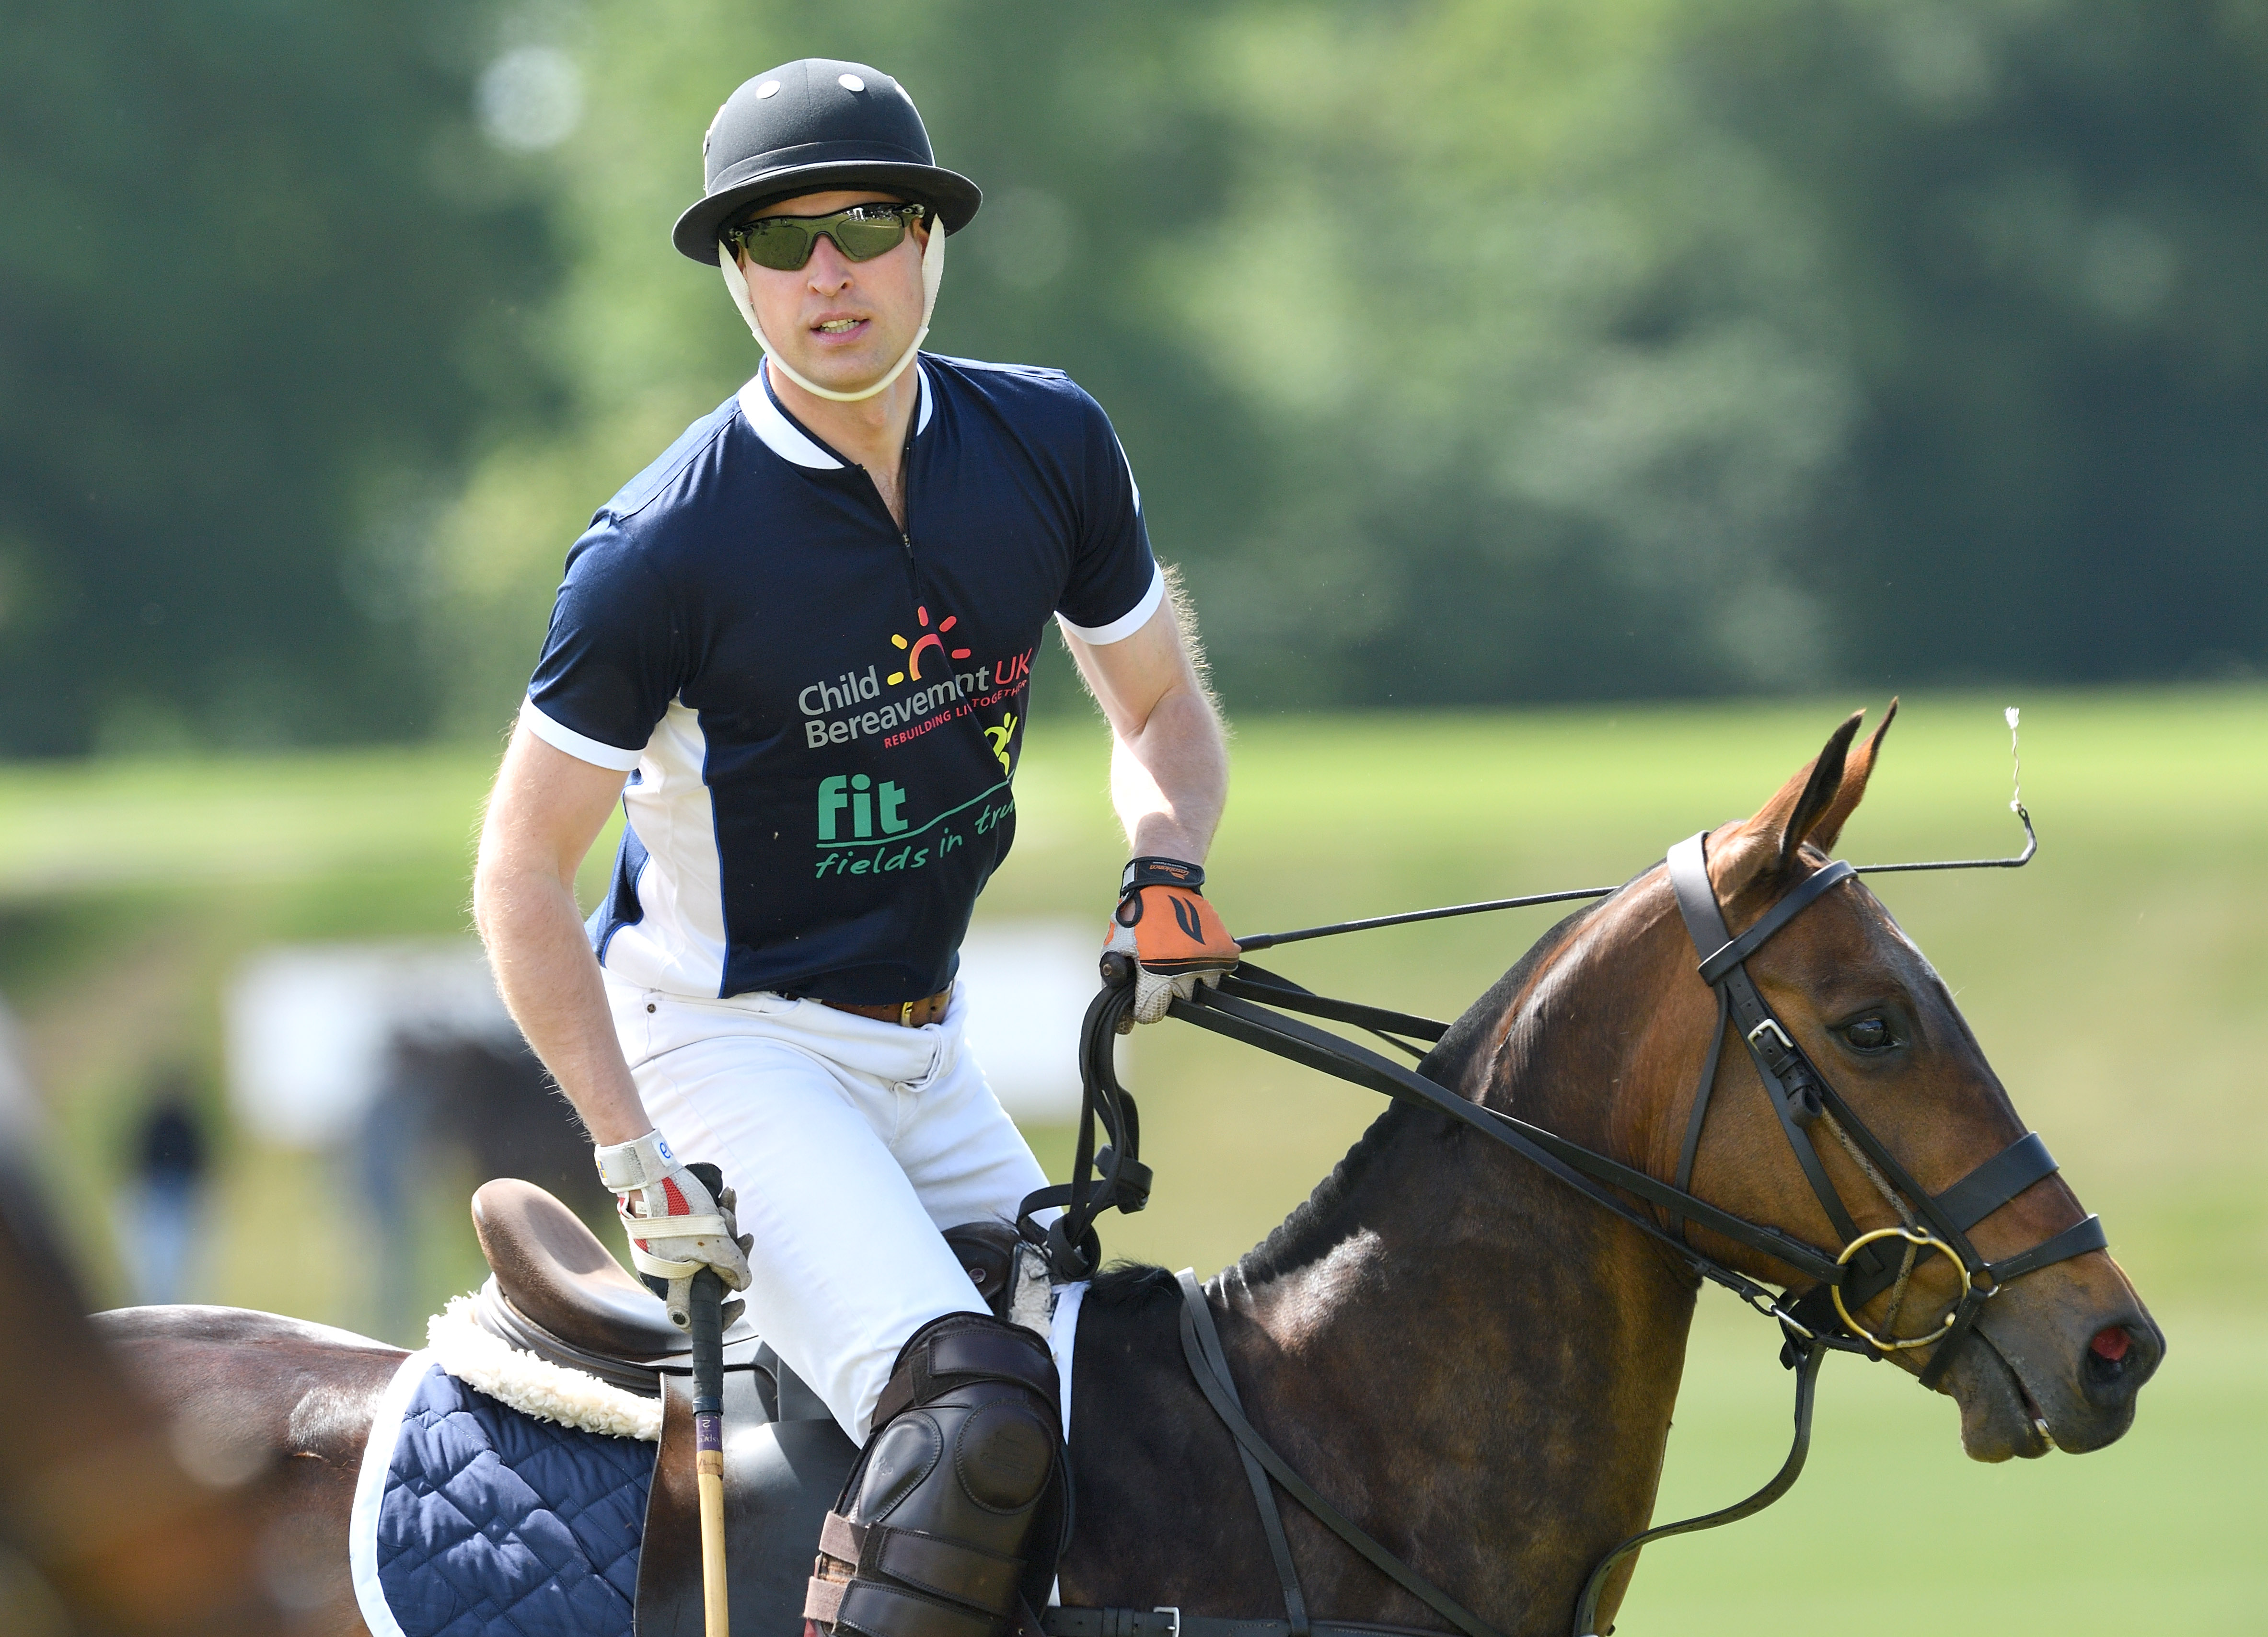 Prince William, Duke of Cambridge takes part in the Maserati Royal Charity Polo Trophy at Beaufort Polo Club on June 11, 2017 in Tetbury, England.